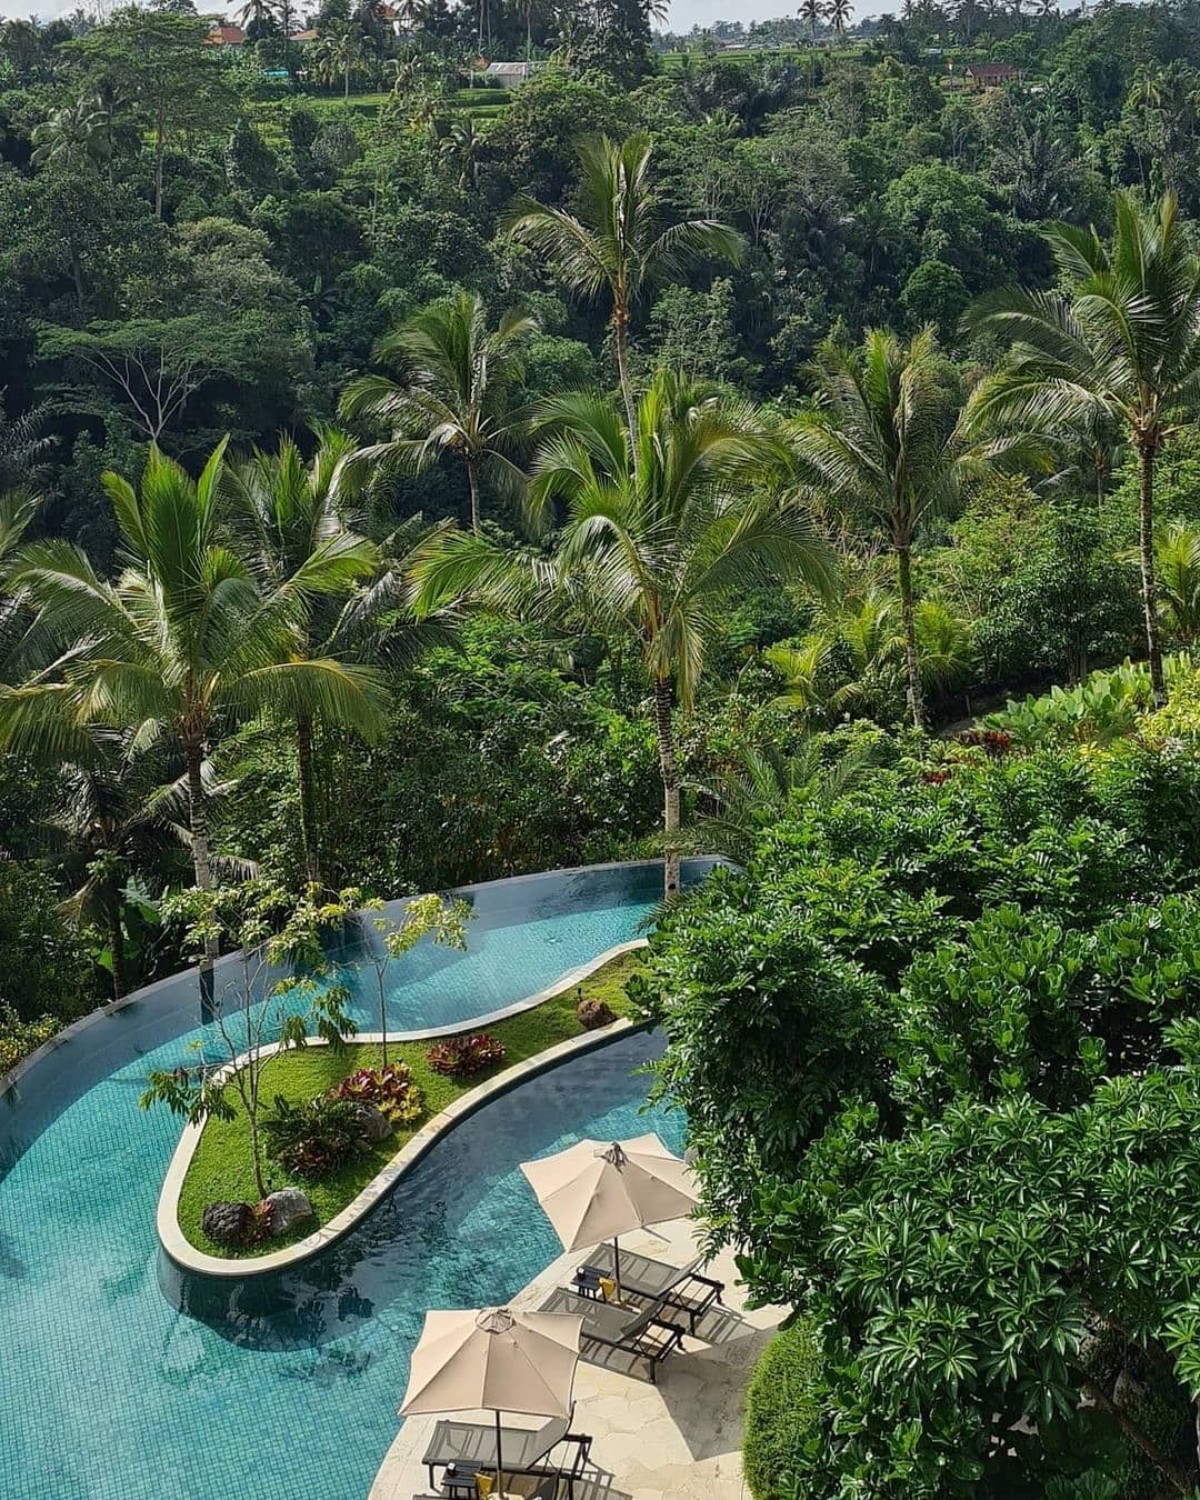 A serene pool curving through lush greenery, flanked by tall palms and lounge chairs with umbrellas in Ubud, Bali.